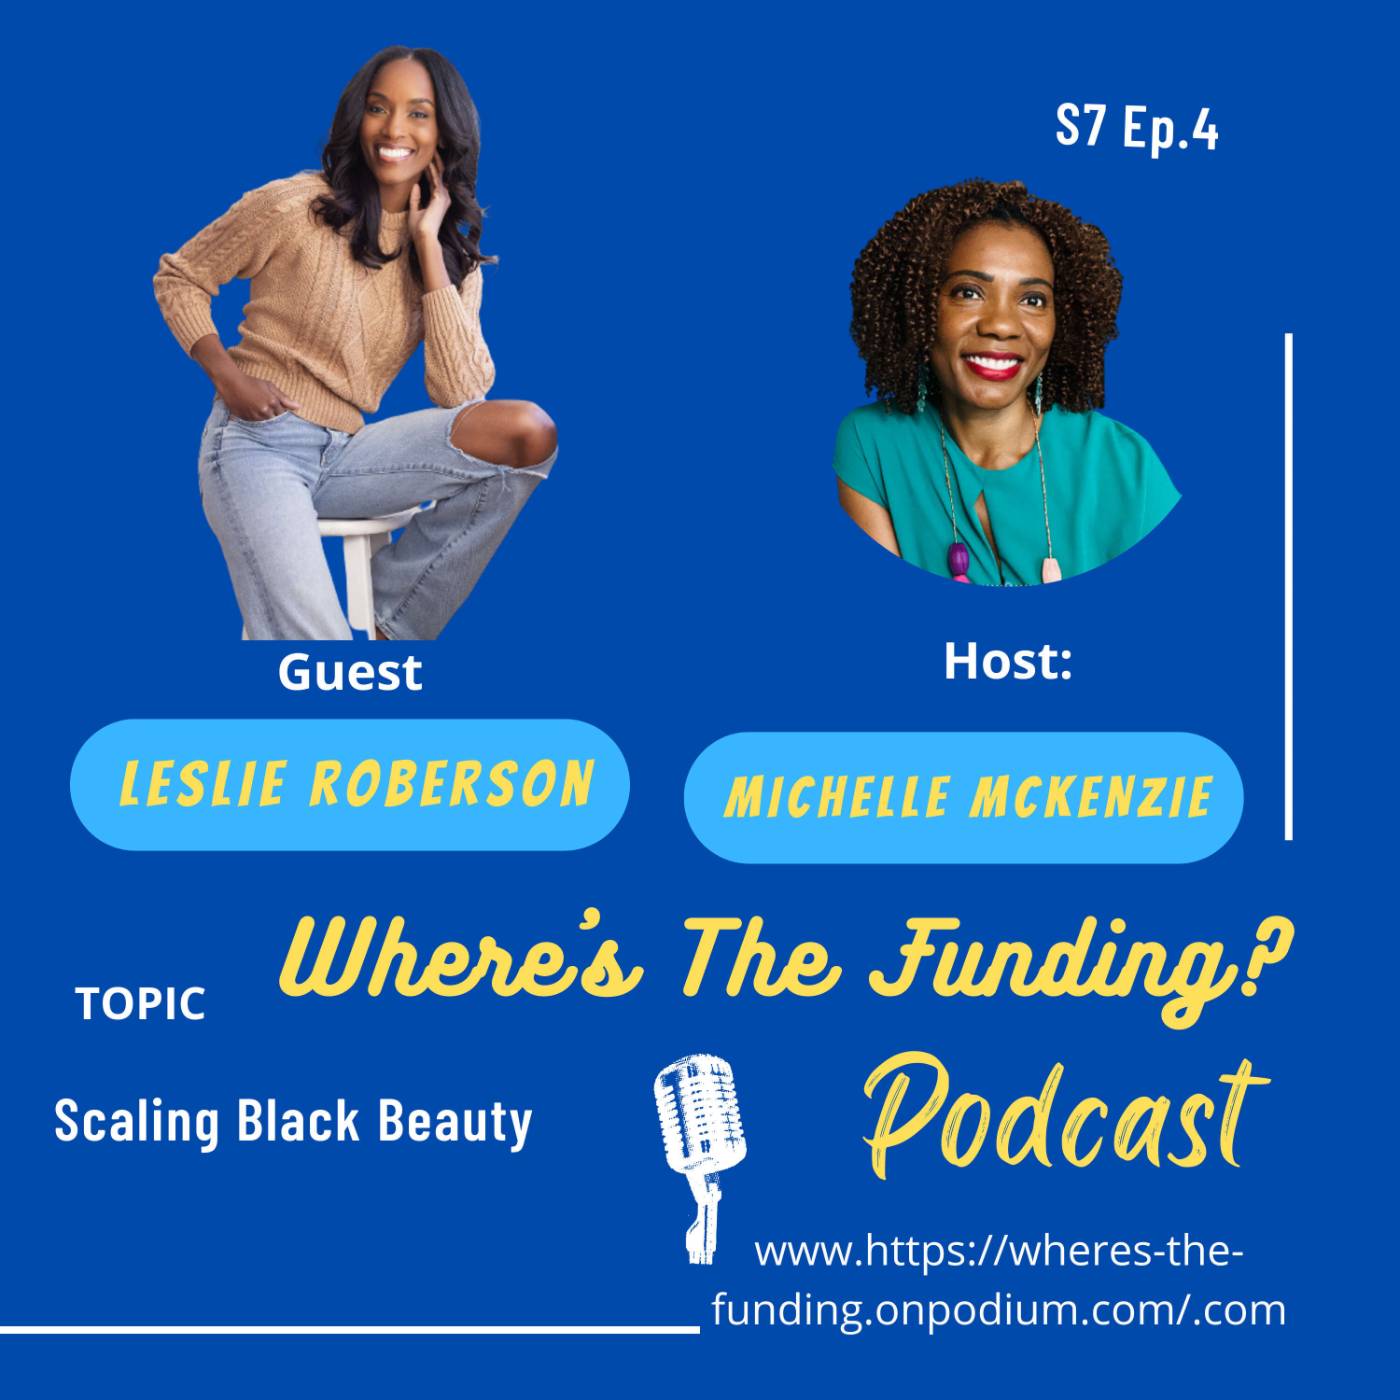 Scaling Black Beauty with Leslie Roberson S7 Ep. 4